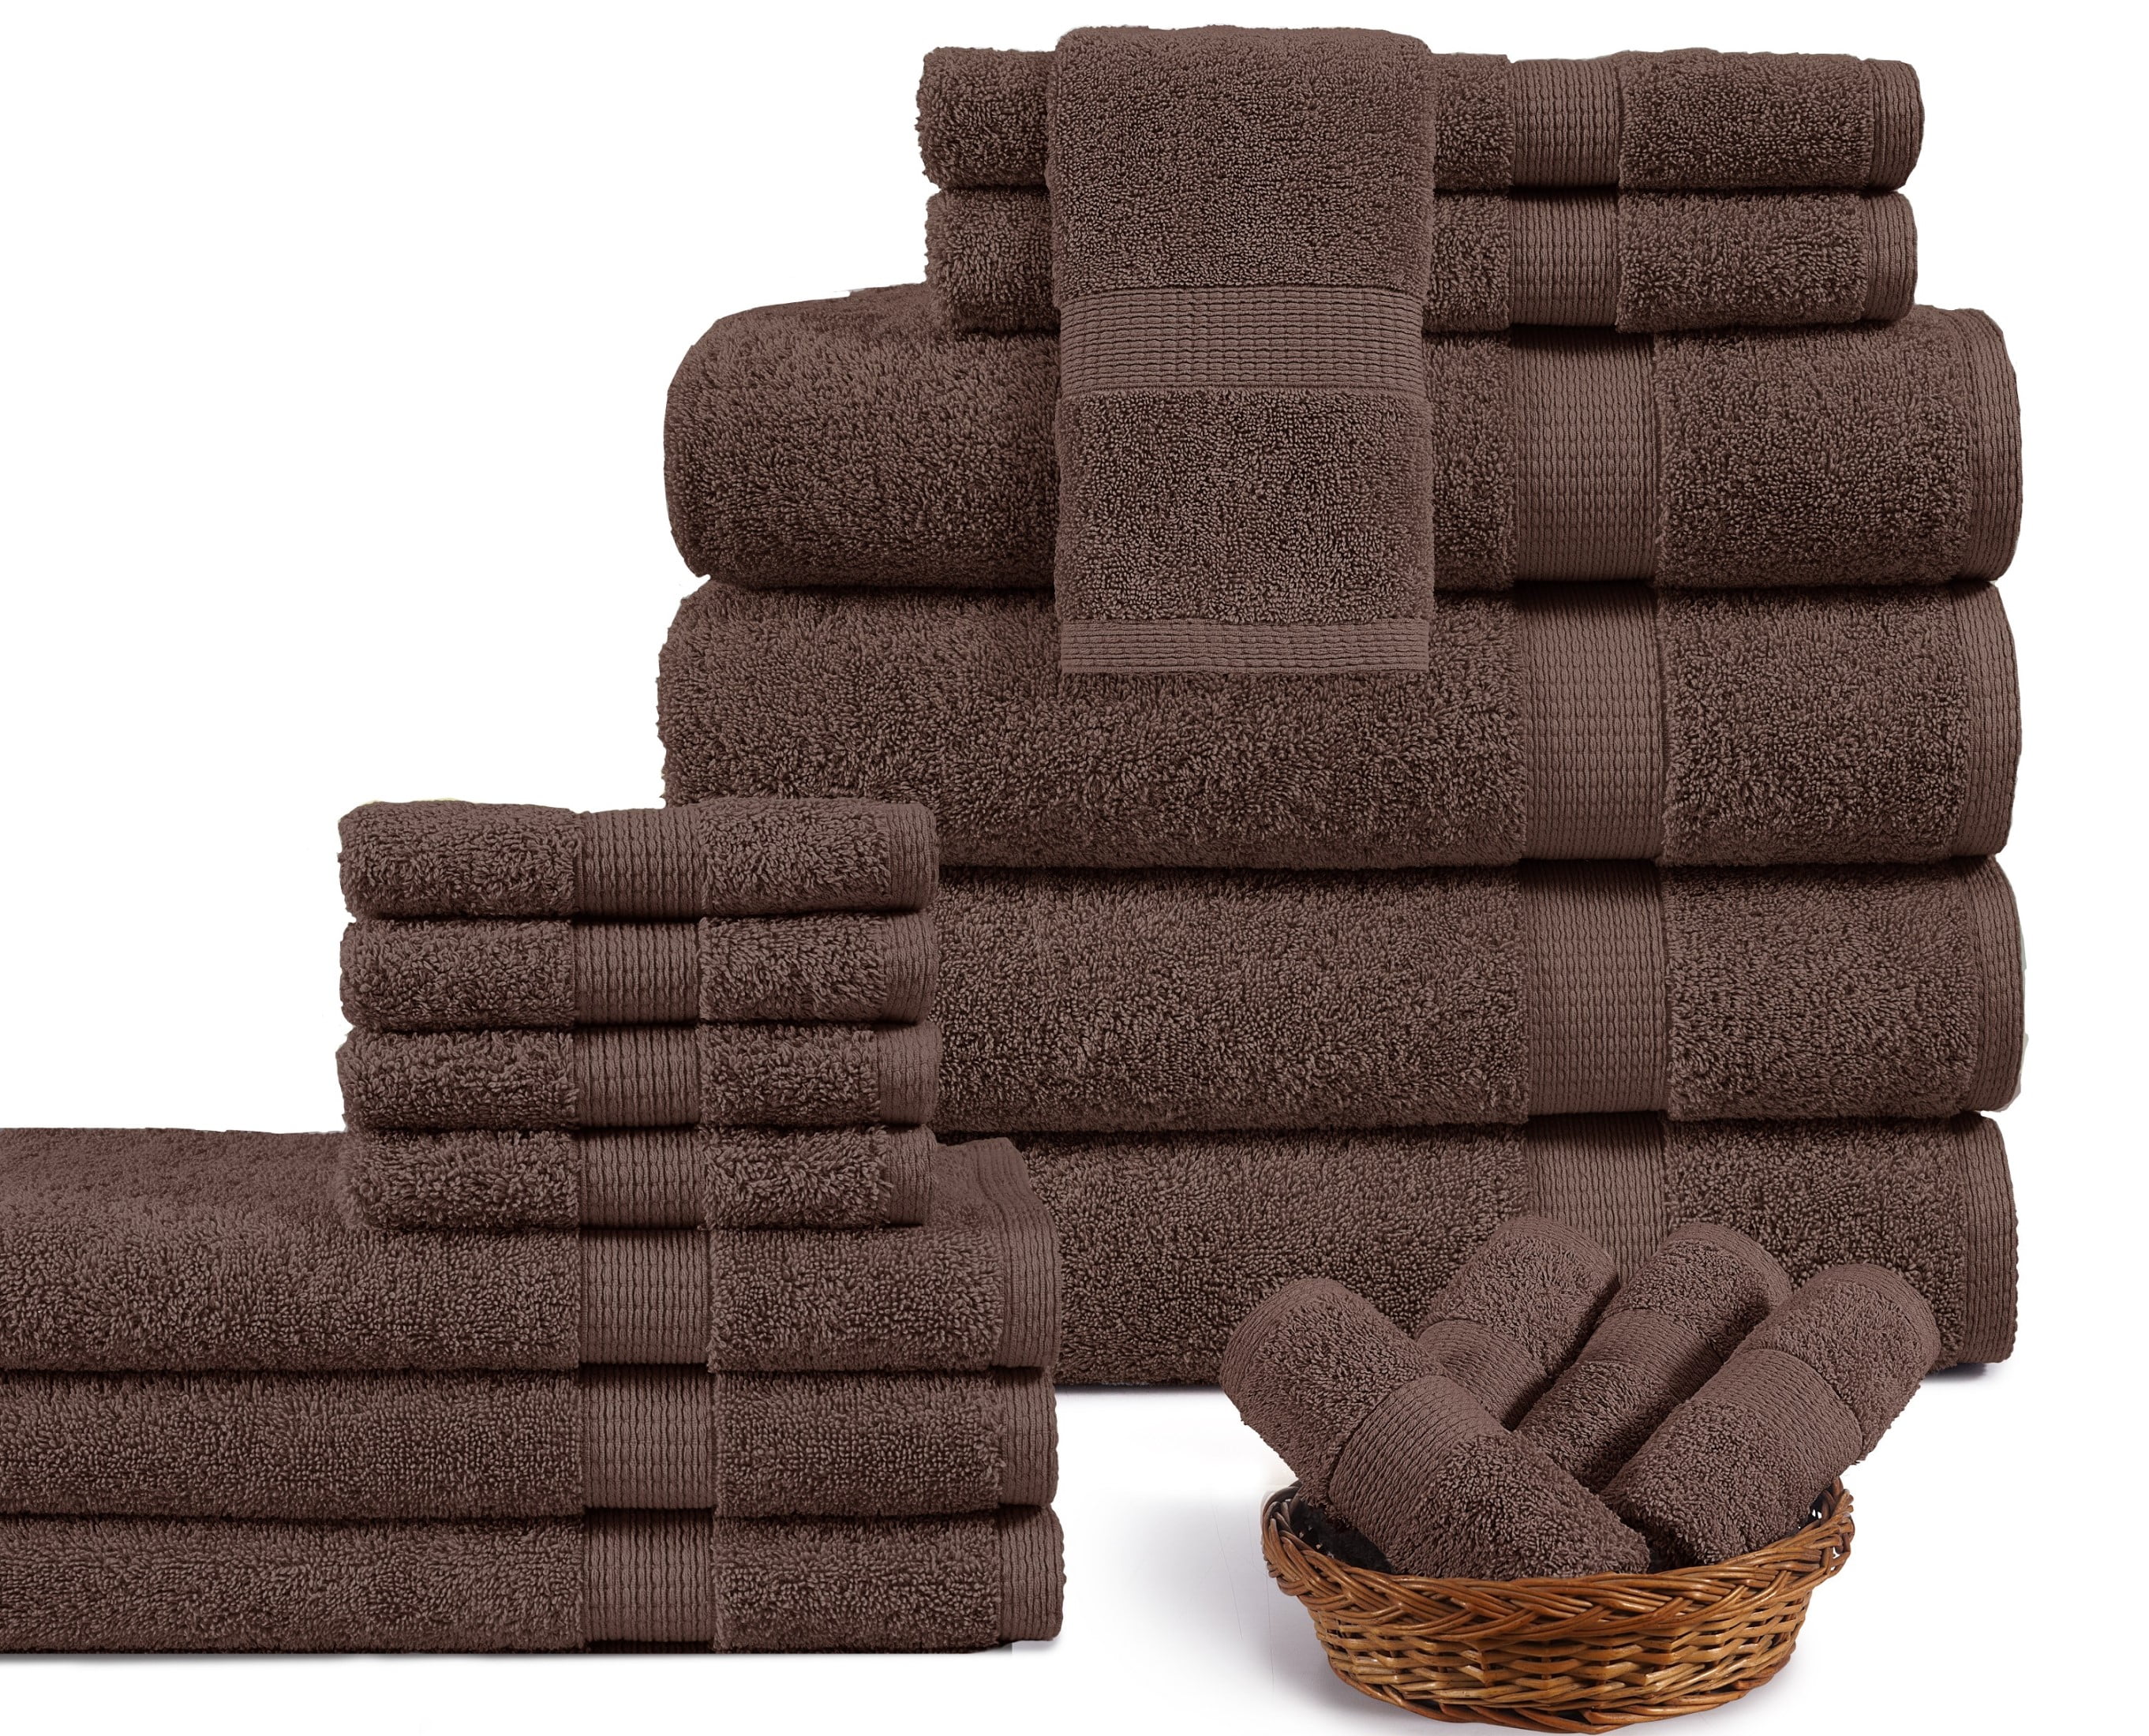 Addy Home Economic Collection Absorbent & Soft Low Twist 18 Piece Towel Set - CHOCOLATE